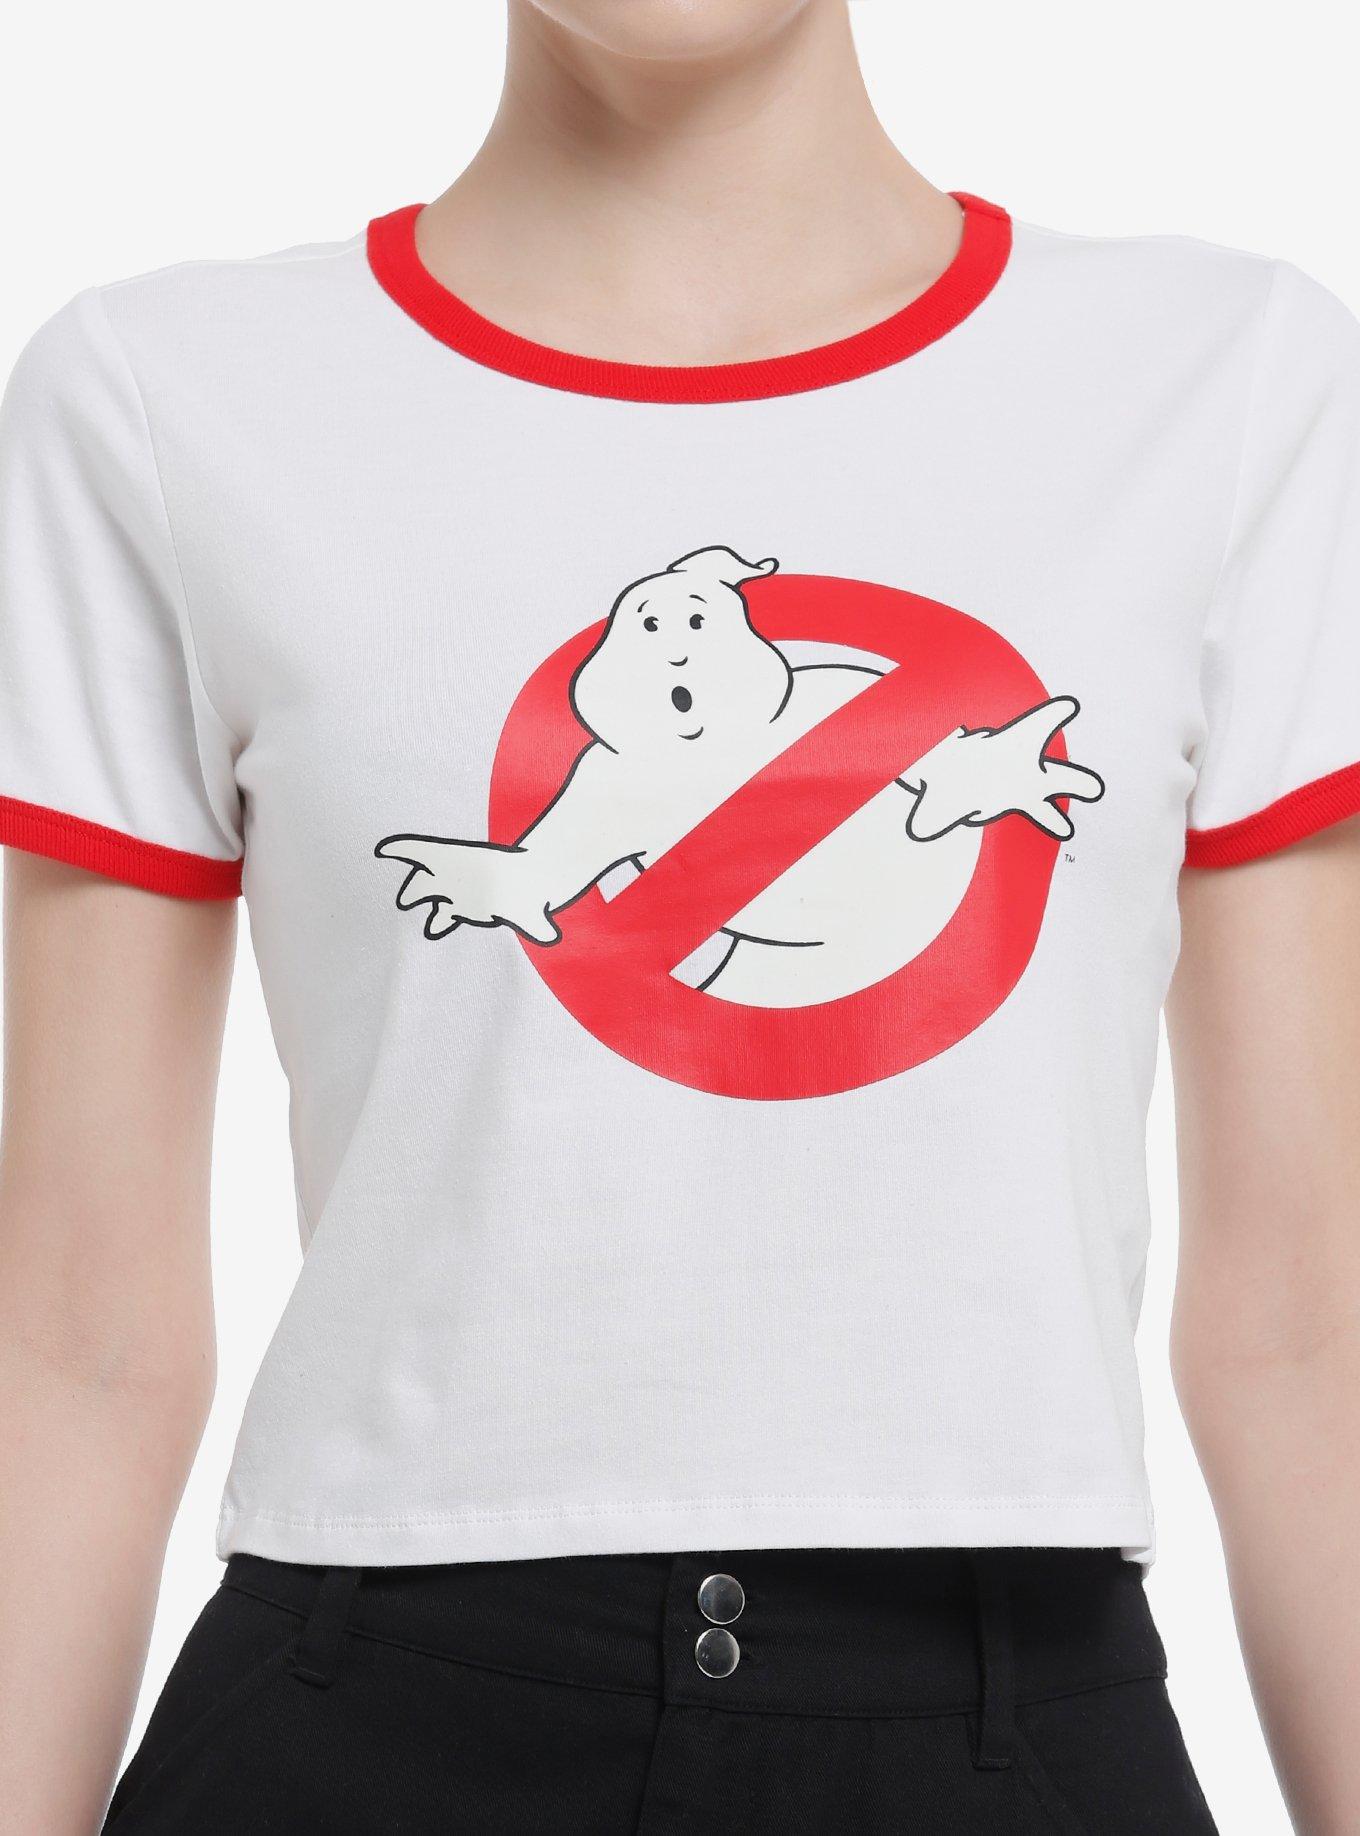 Her Universe Ghostbusters Logo Glow-In-The-Dark Girls Baby Ringer T-Shirt, RED, hi-res